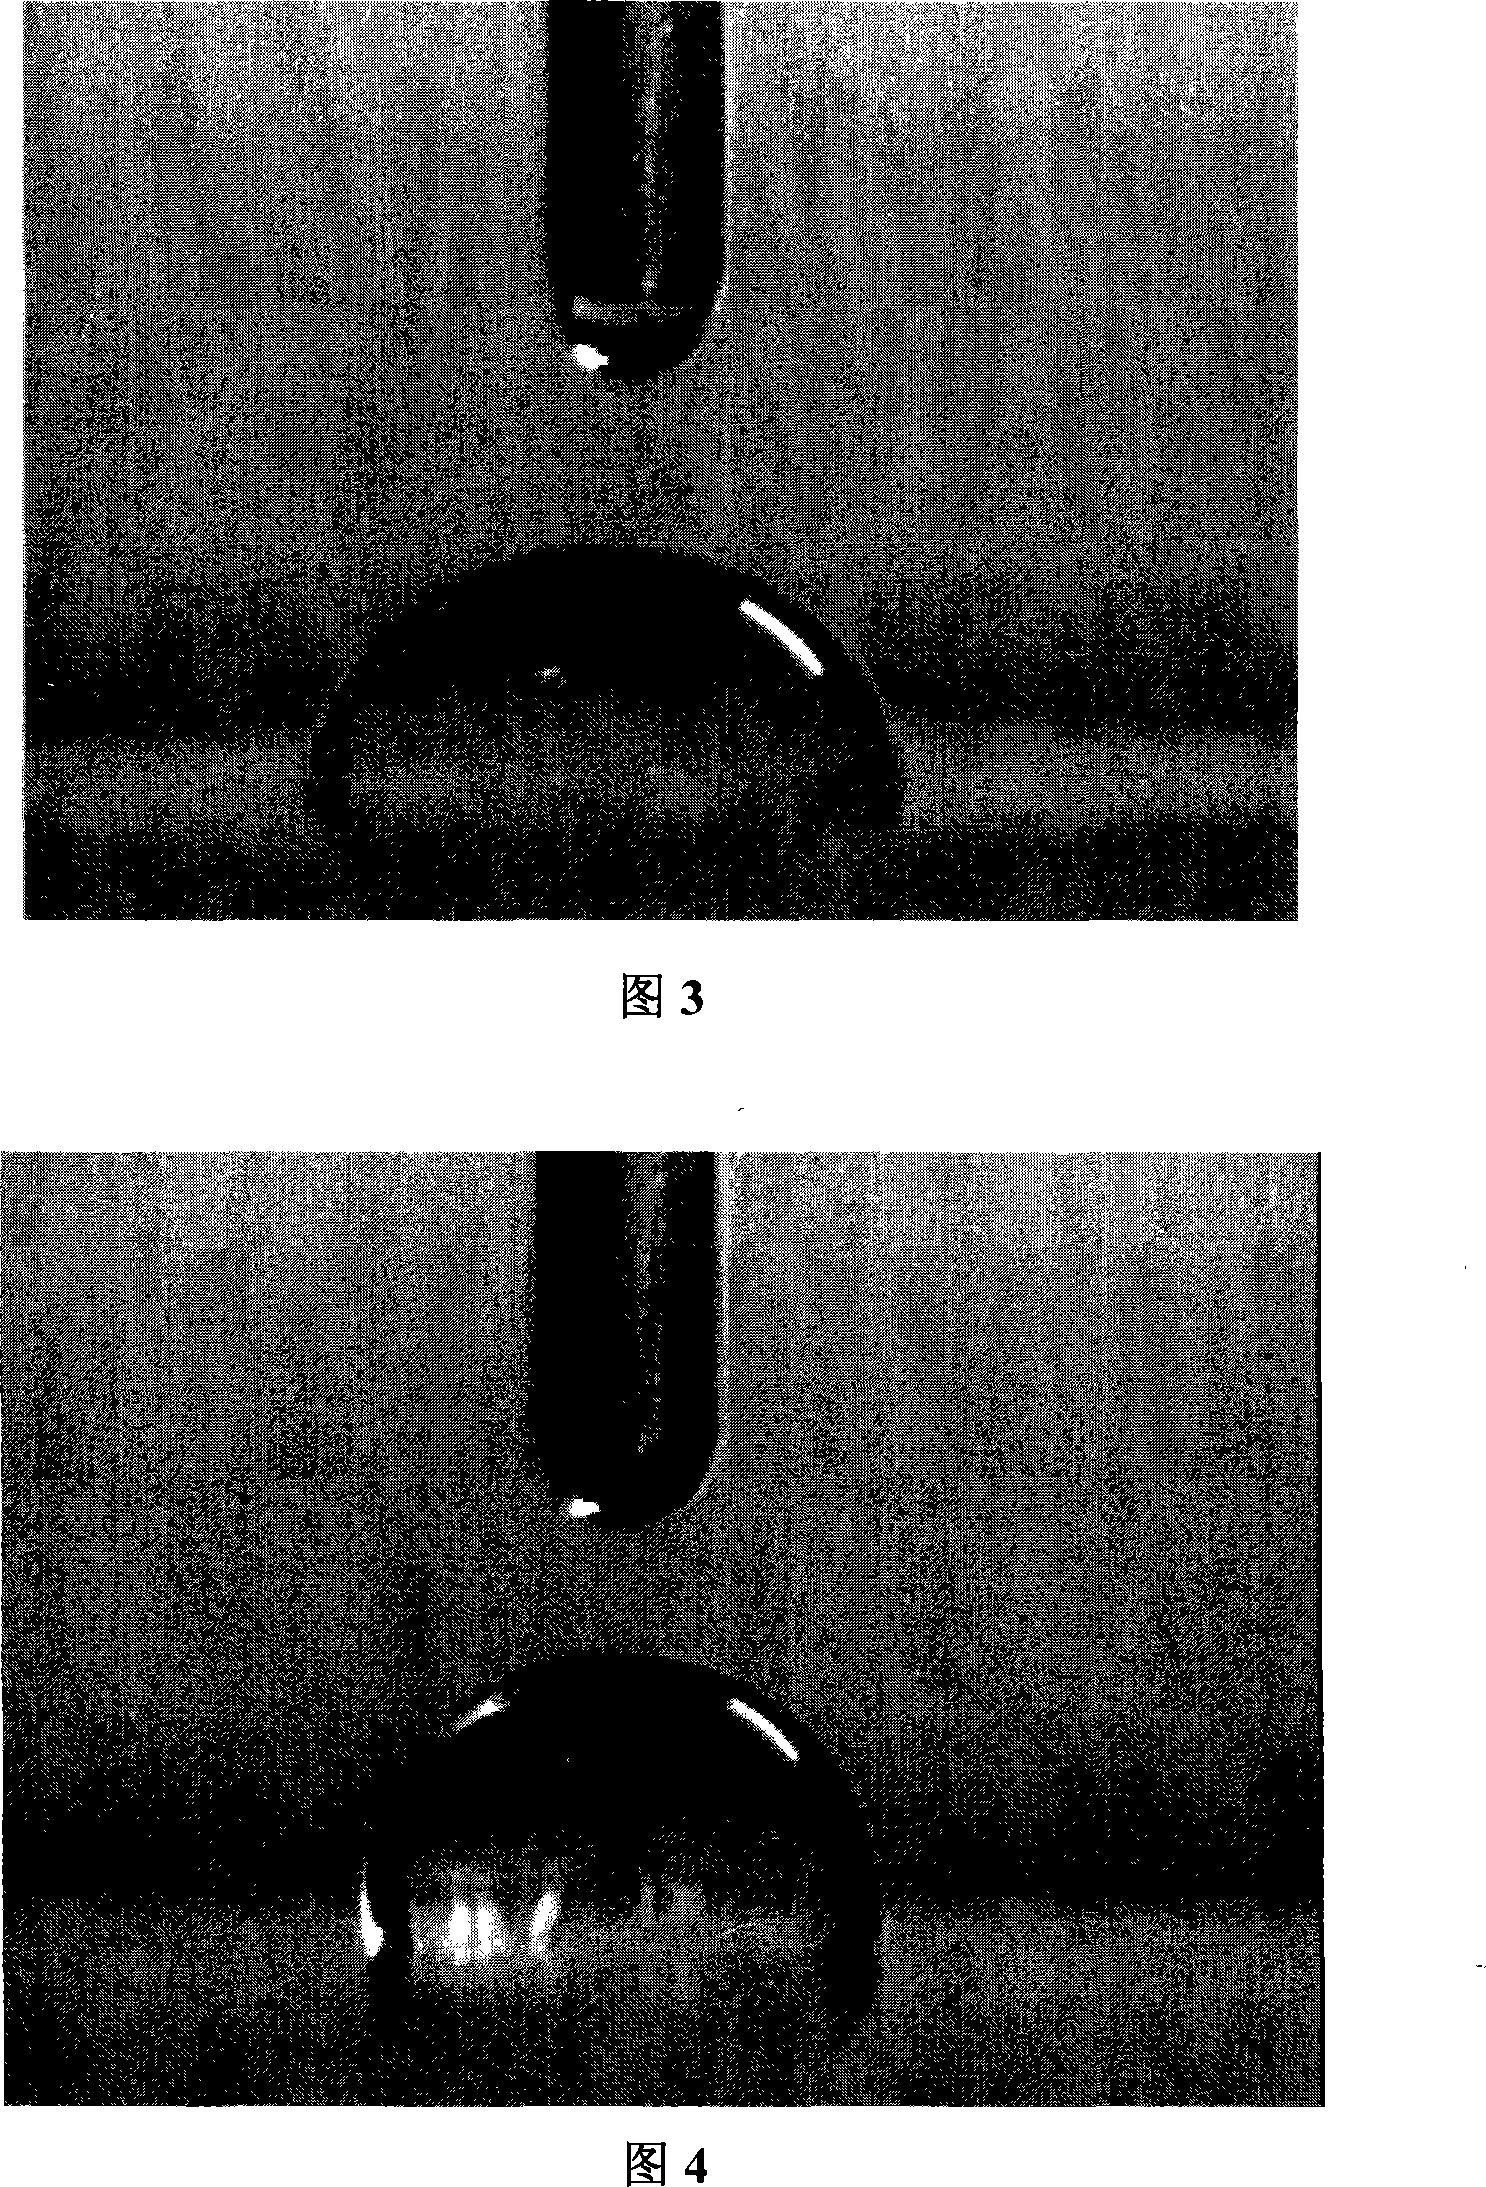 Polypropylene material with low surface tension and method for preparing the same